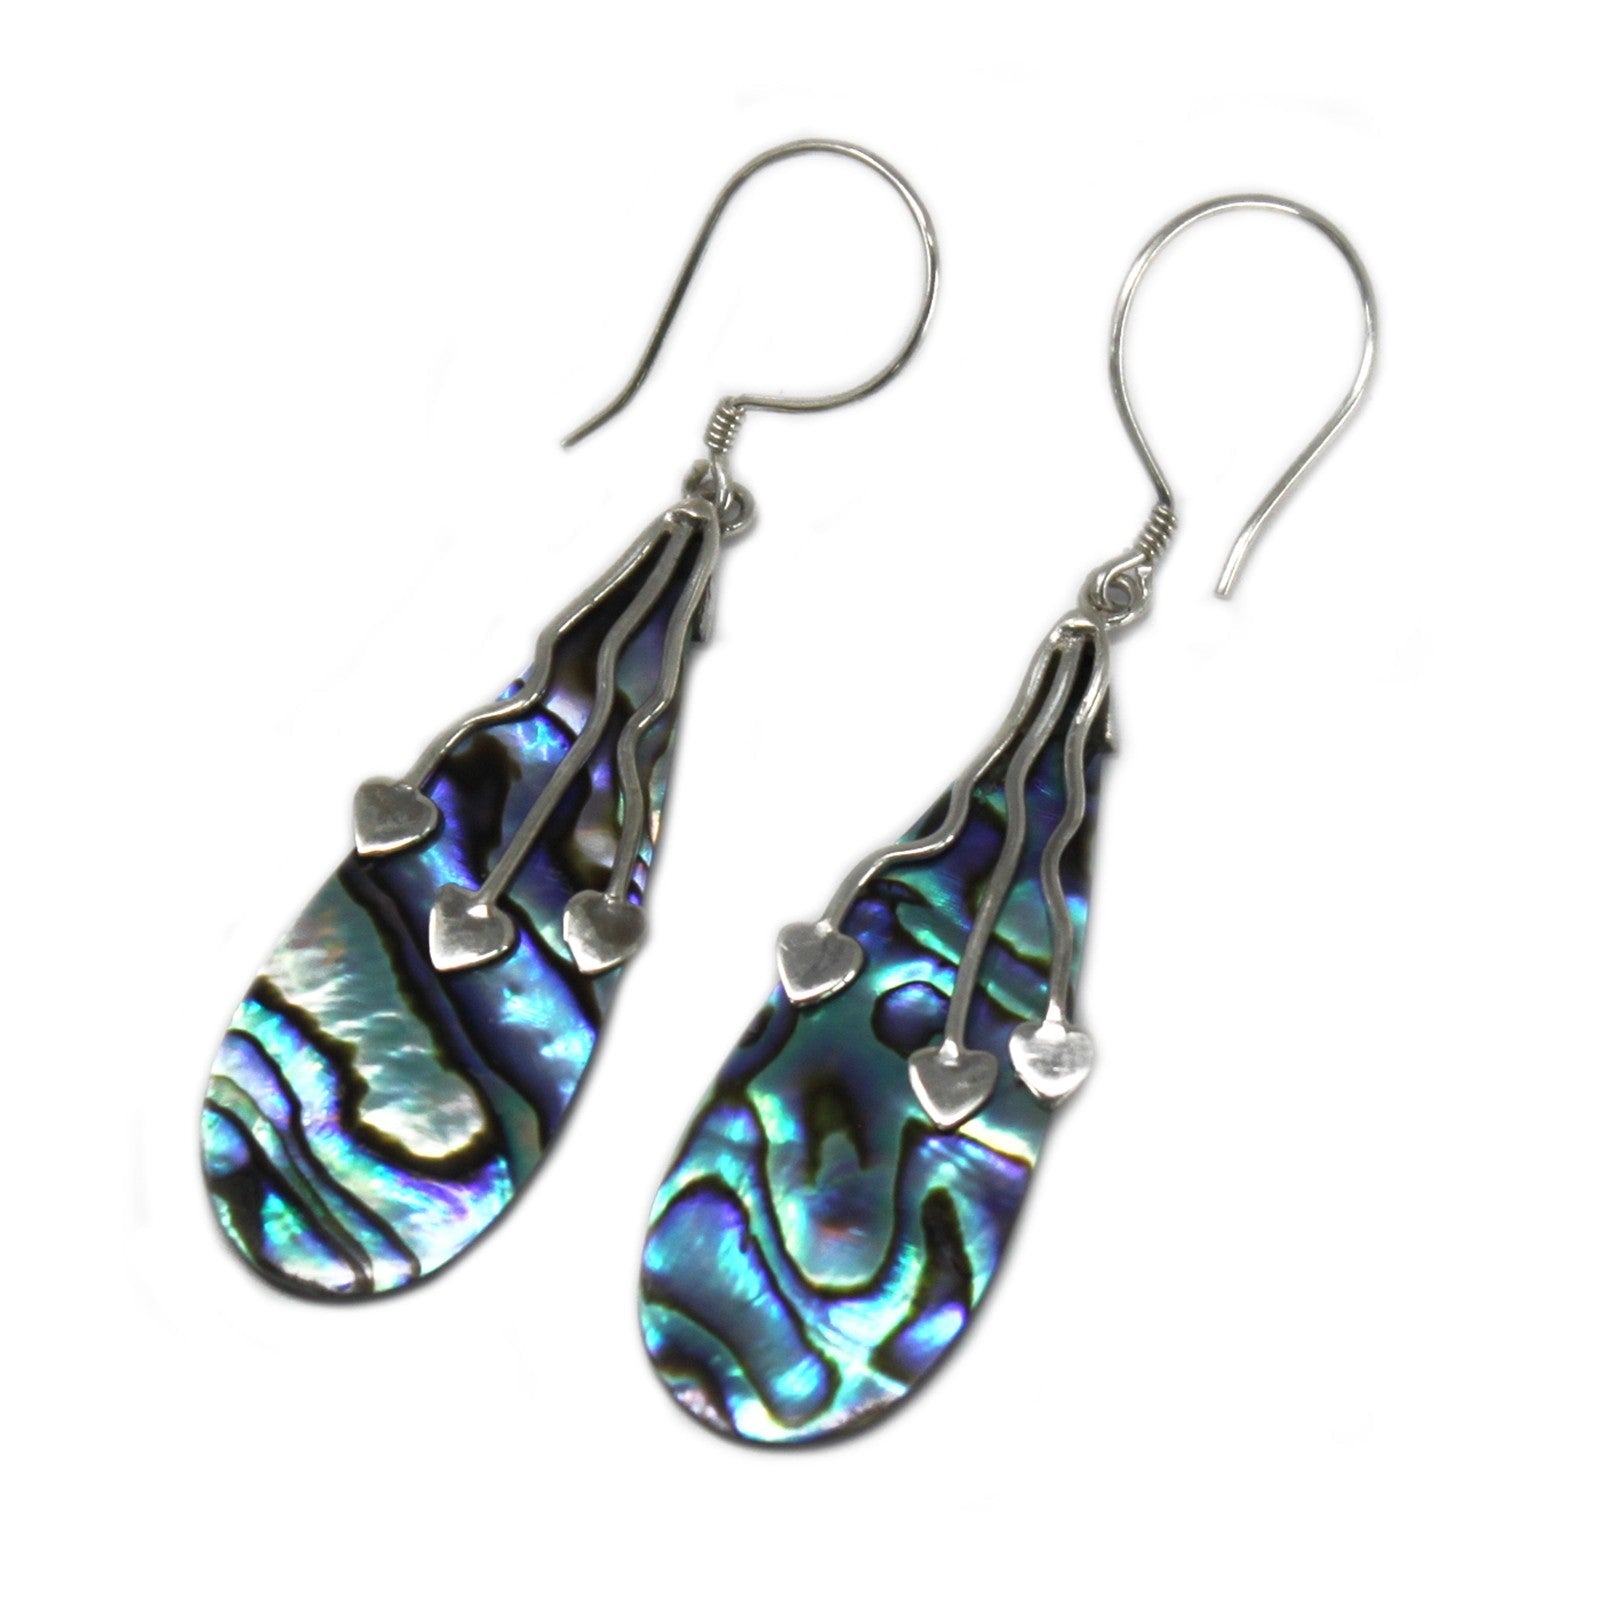 View Shell Silver Earrings Three Hearts Abalone information